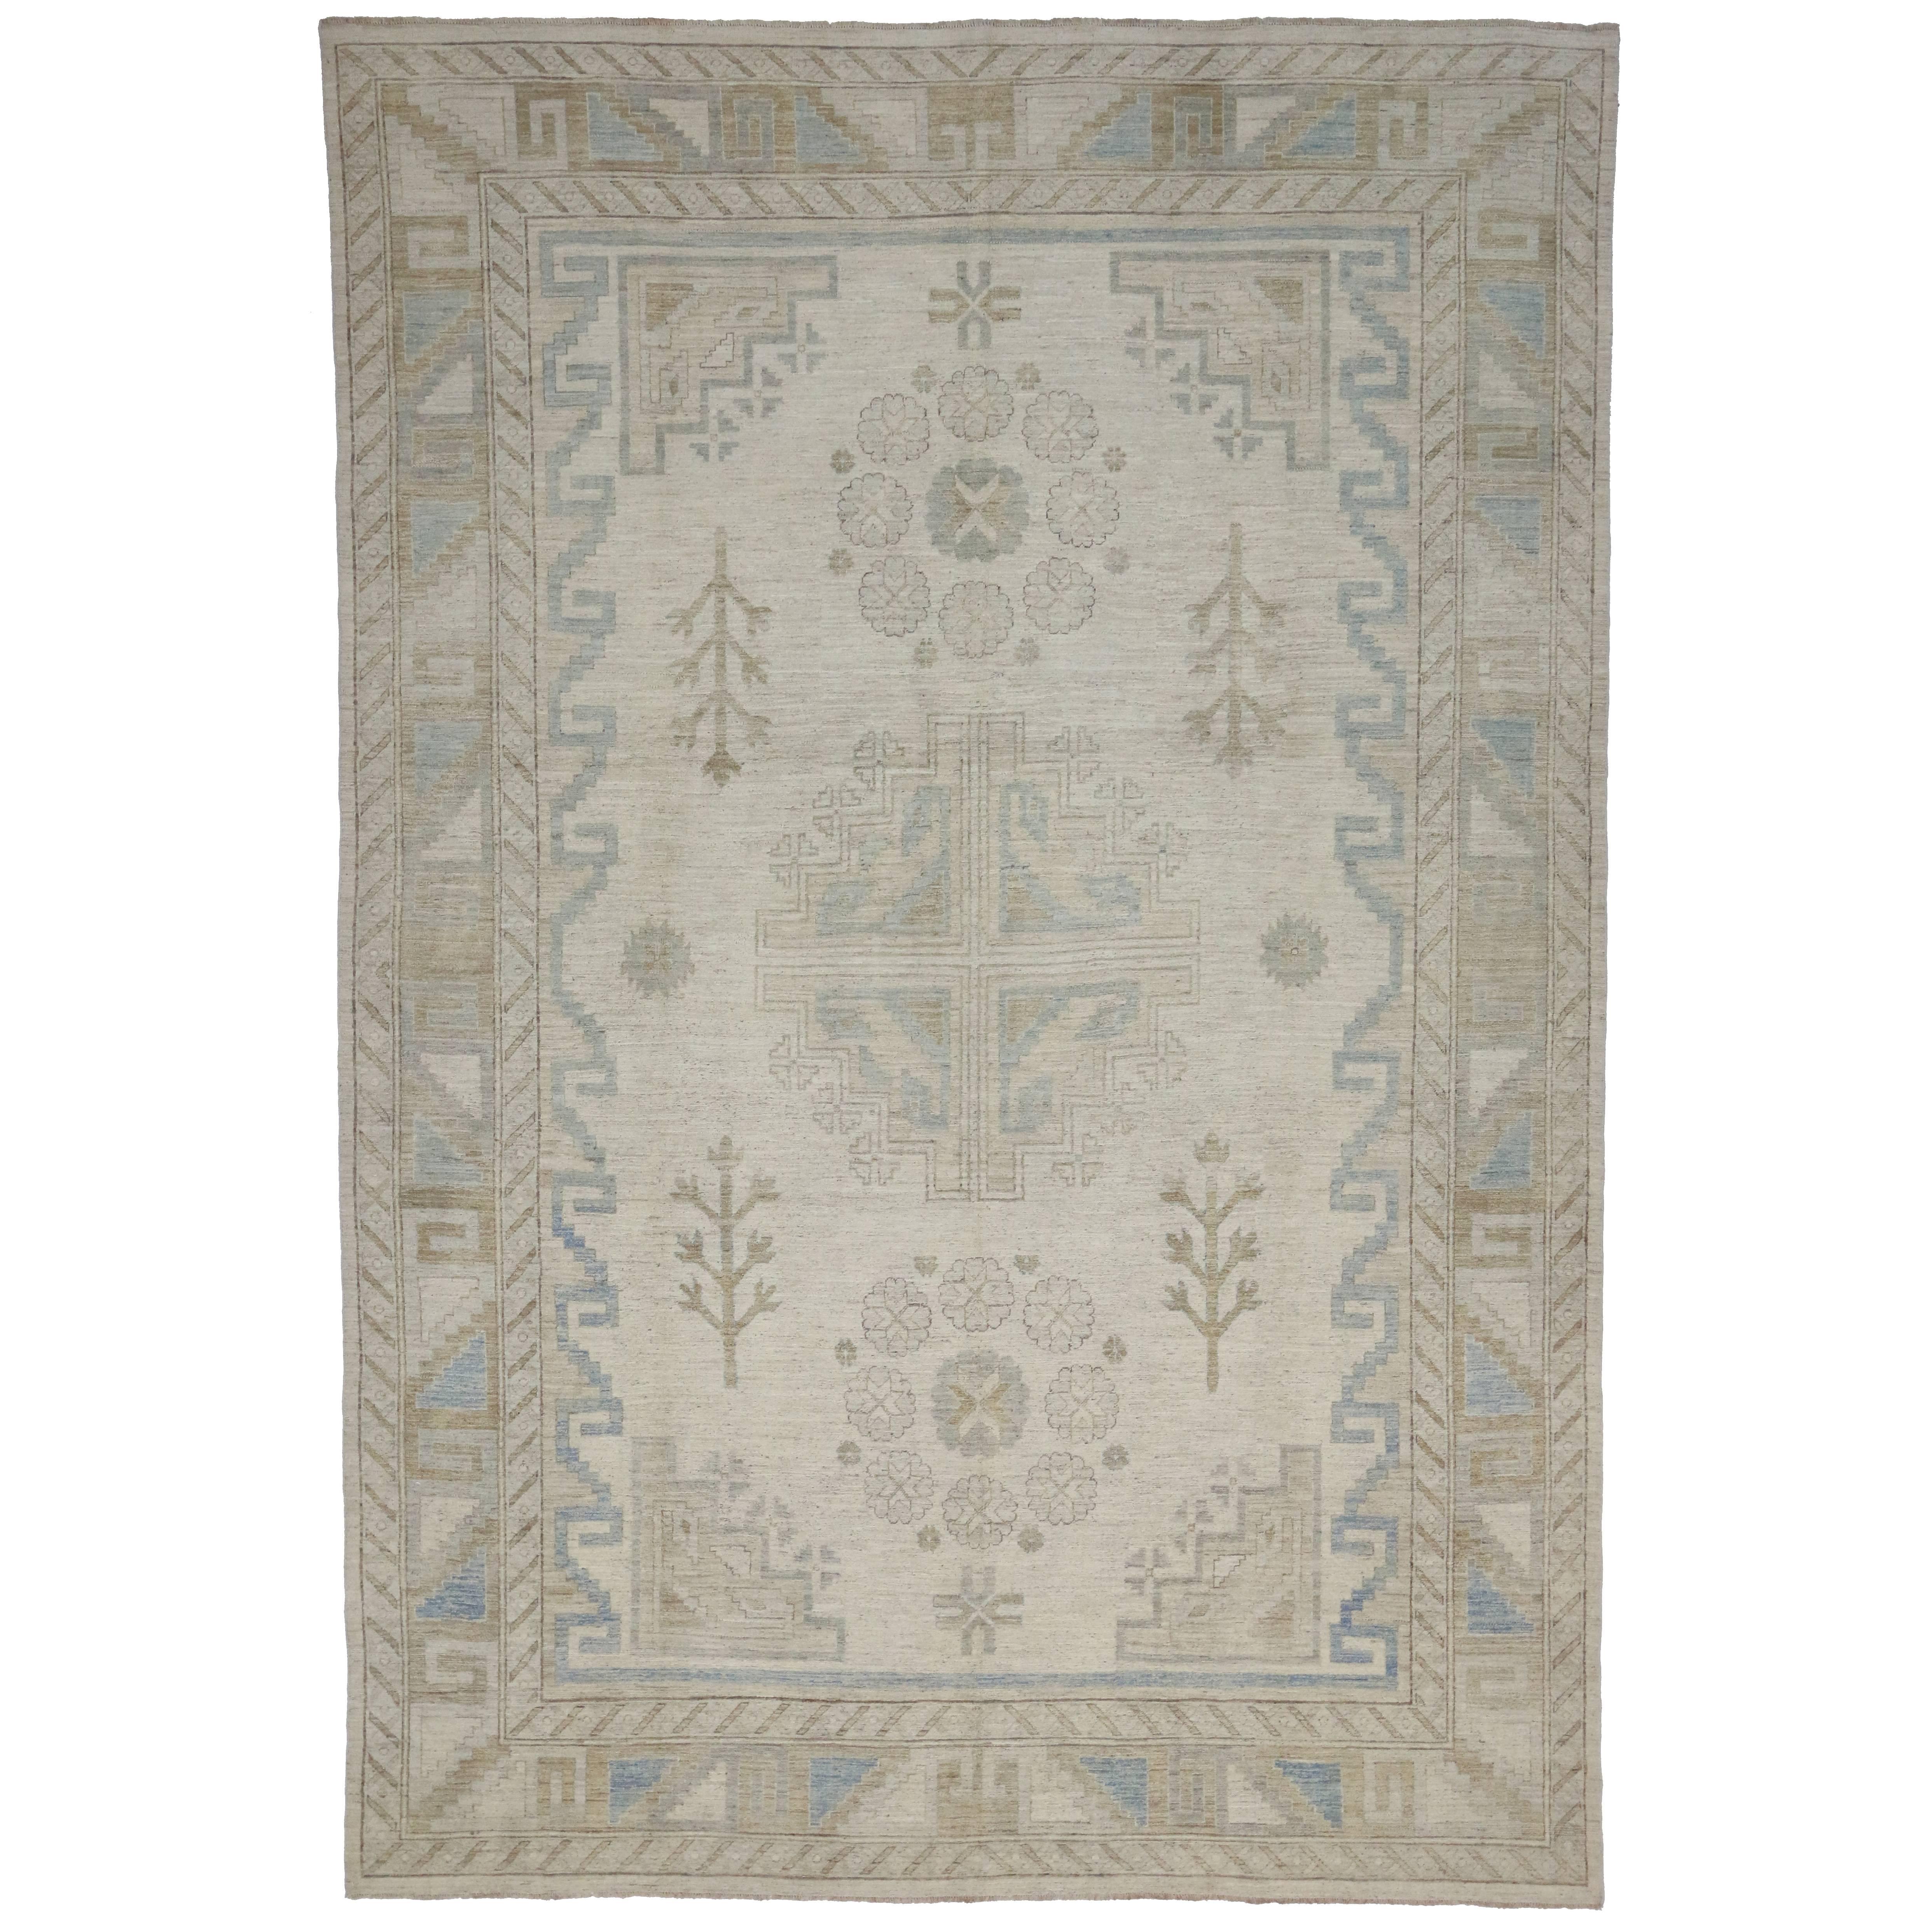 New Transitional Area Rug with Khotan Design in Warm, Neutral Colors